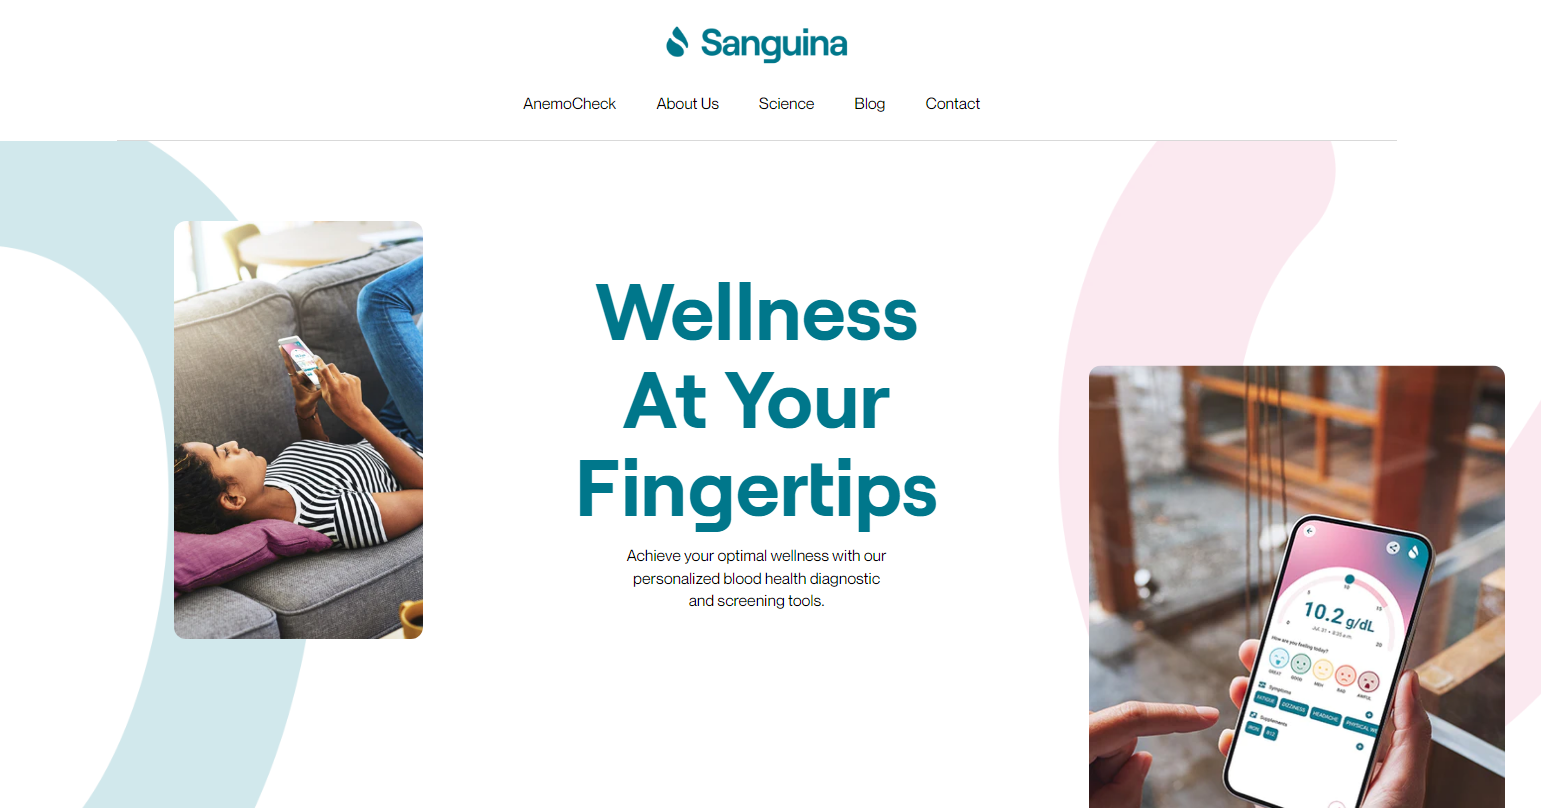 Sanguina, Inc. Secures $2.8 Million in Series A Funding Led by Veritus Holdings, LLC